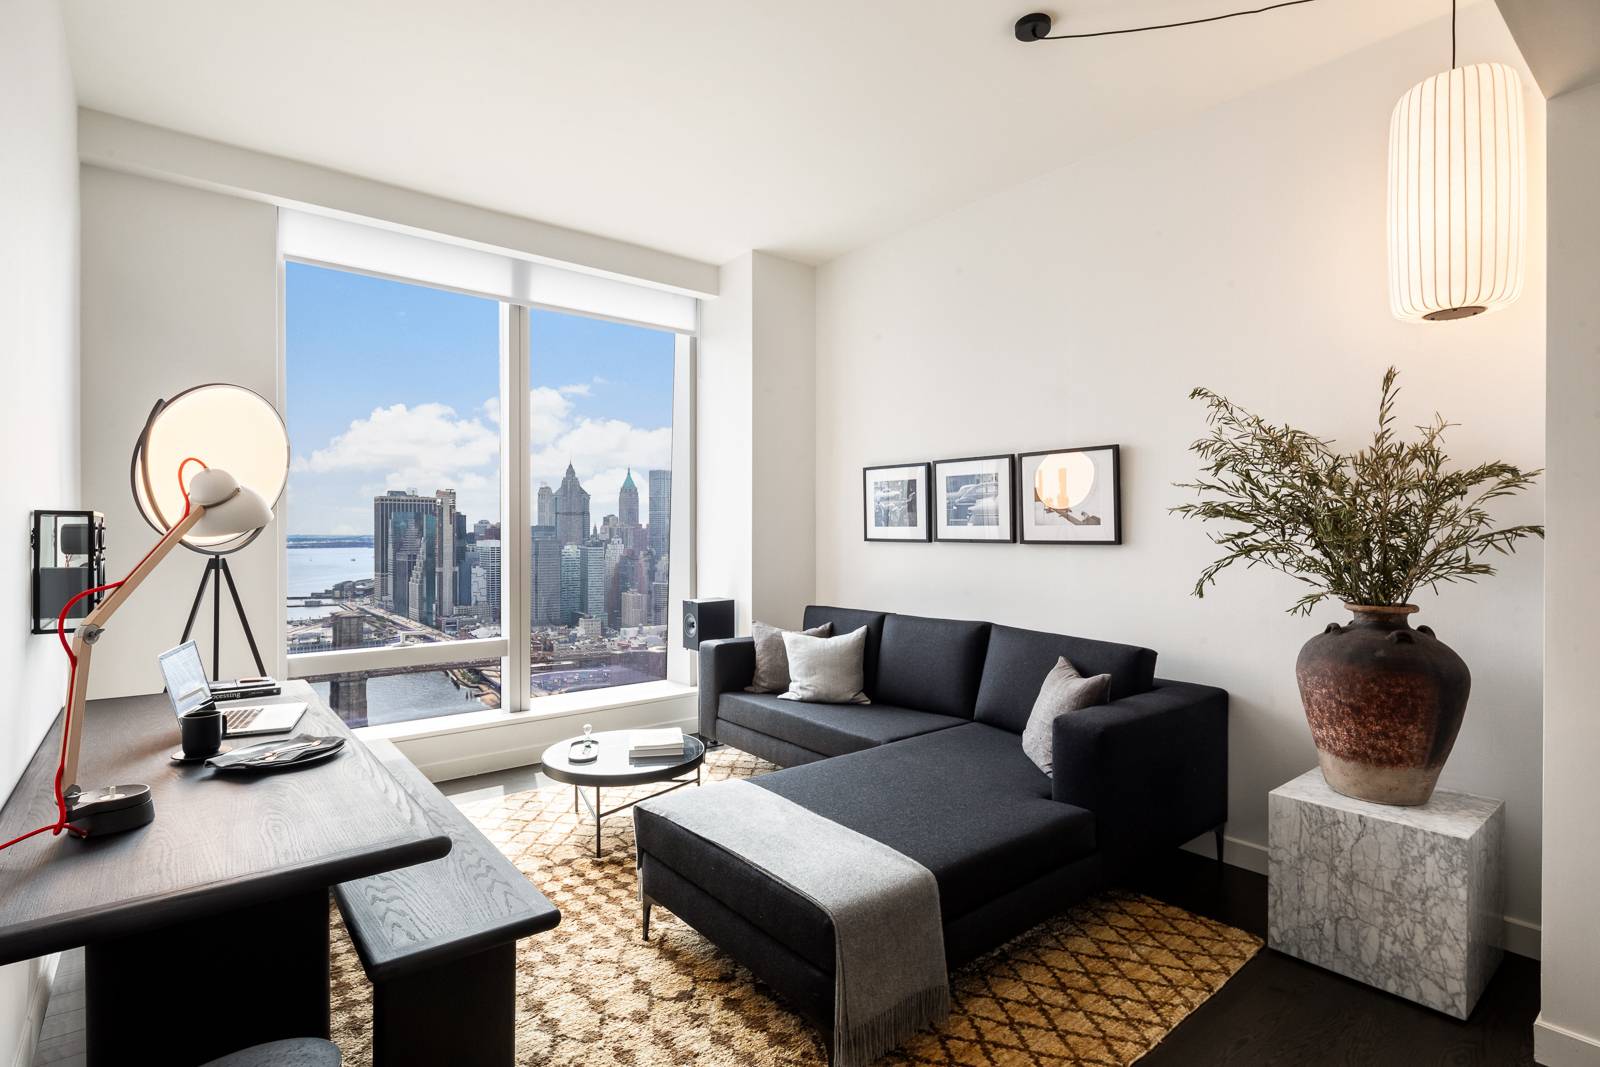 ONE MANHATTAN SQUARE OFFERS ONE OF THE LAST 20 YEAR TAX ABATEMENTS AVAILABLE IN NEW YORK CITY Residence 63L is a 709 square foot one bedroom, one bathroom with an ...